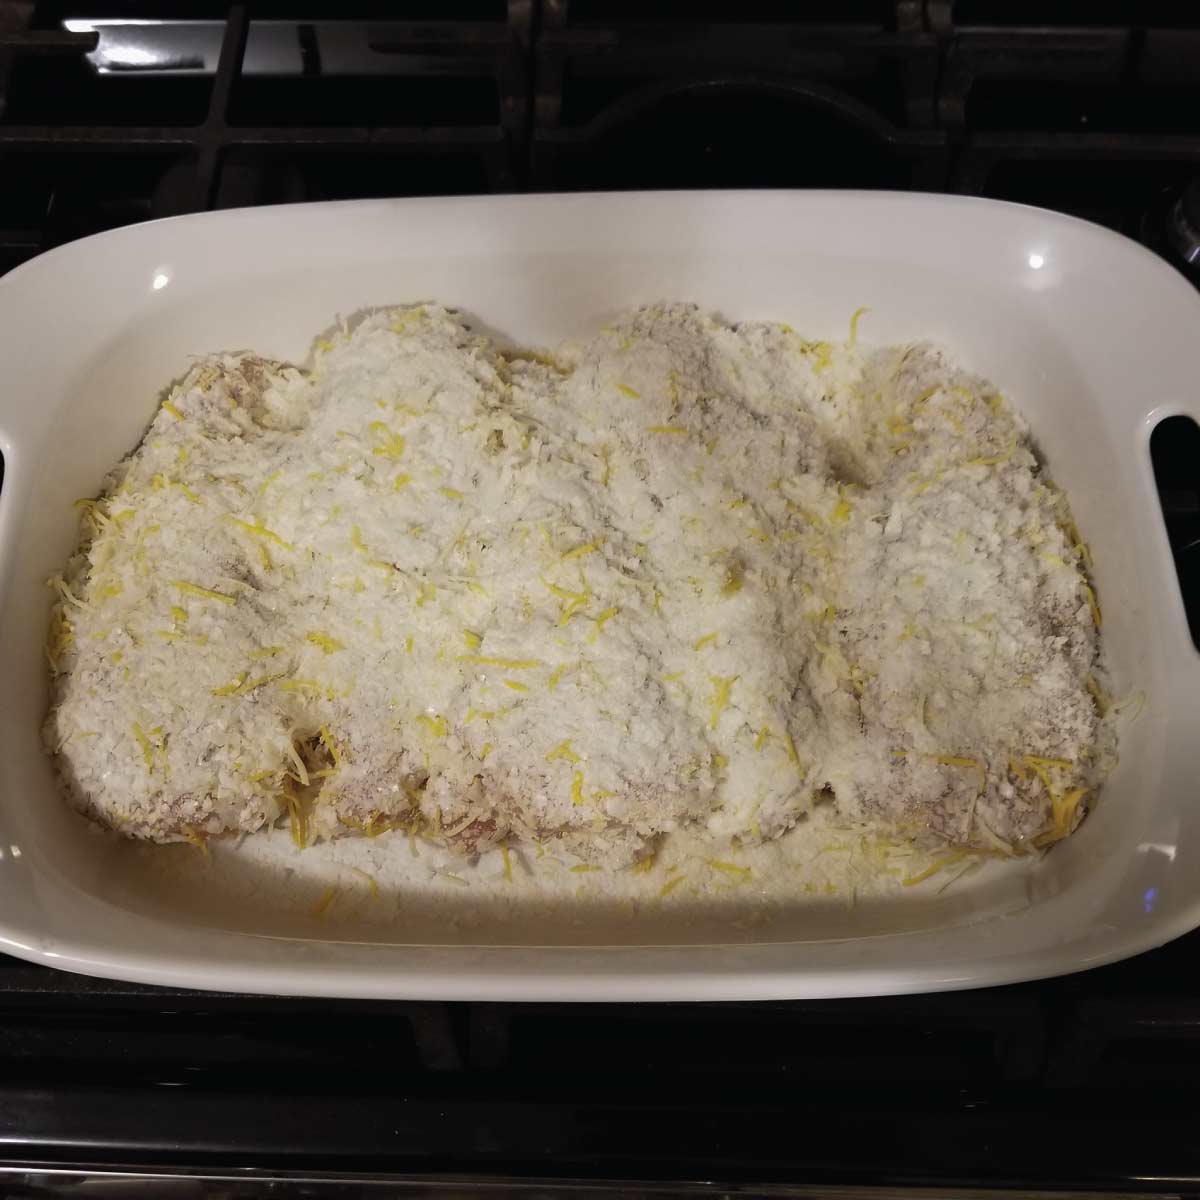 Chicken in a baking dish prepped and ready to bake.